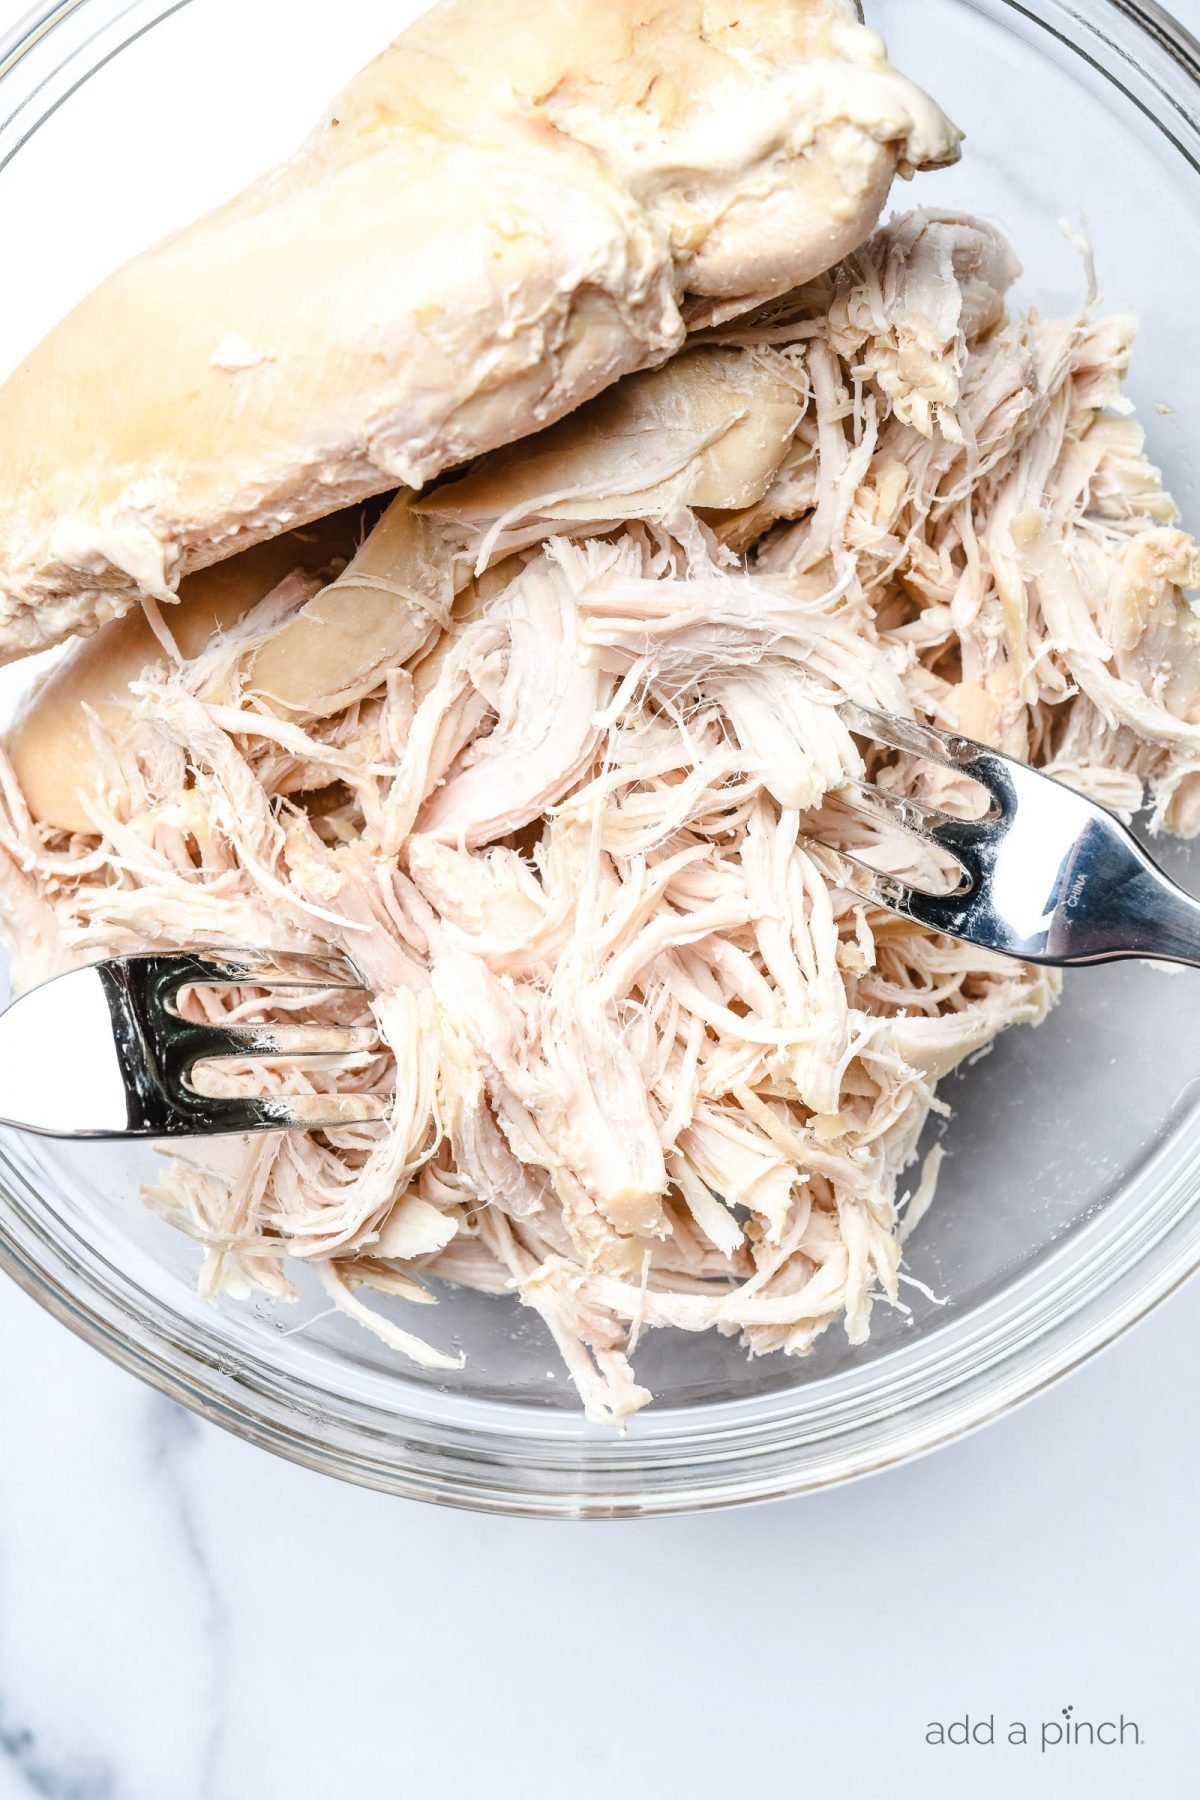 Photograph of chicken in a glass bowl being shredded with two forks.